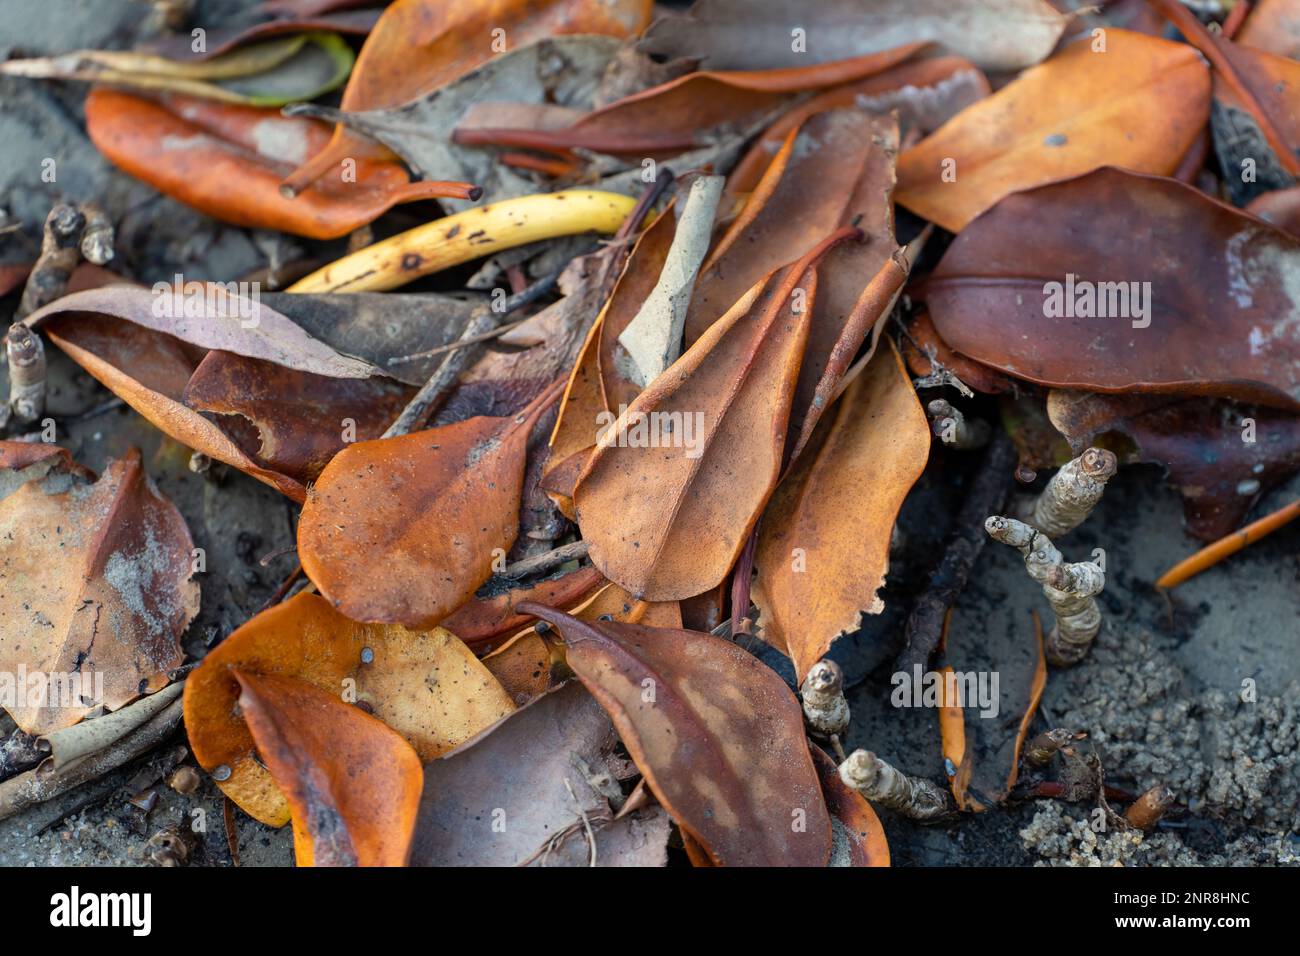 Closeup of fallen mangrove leaves in autumn tones washed up on the beach Stock Photo